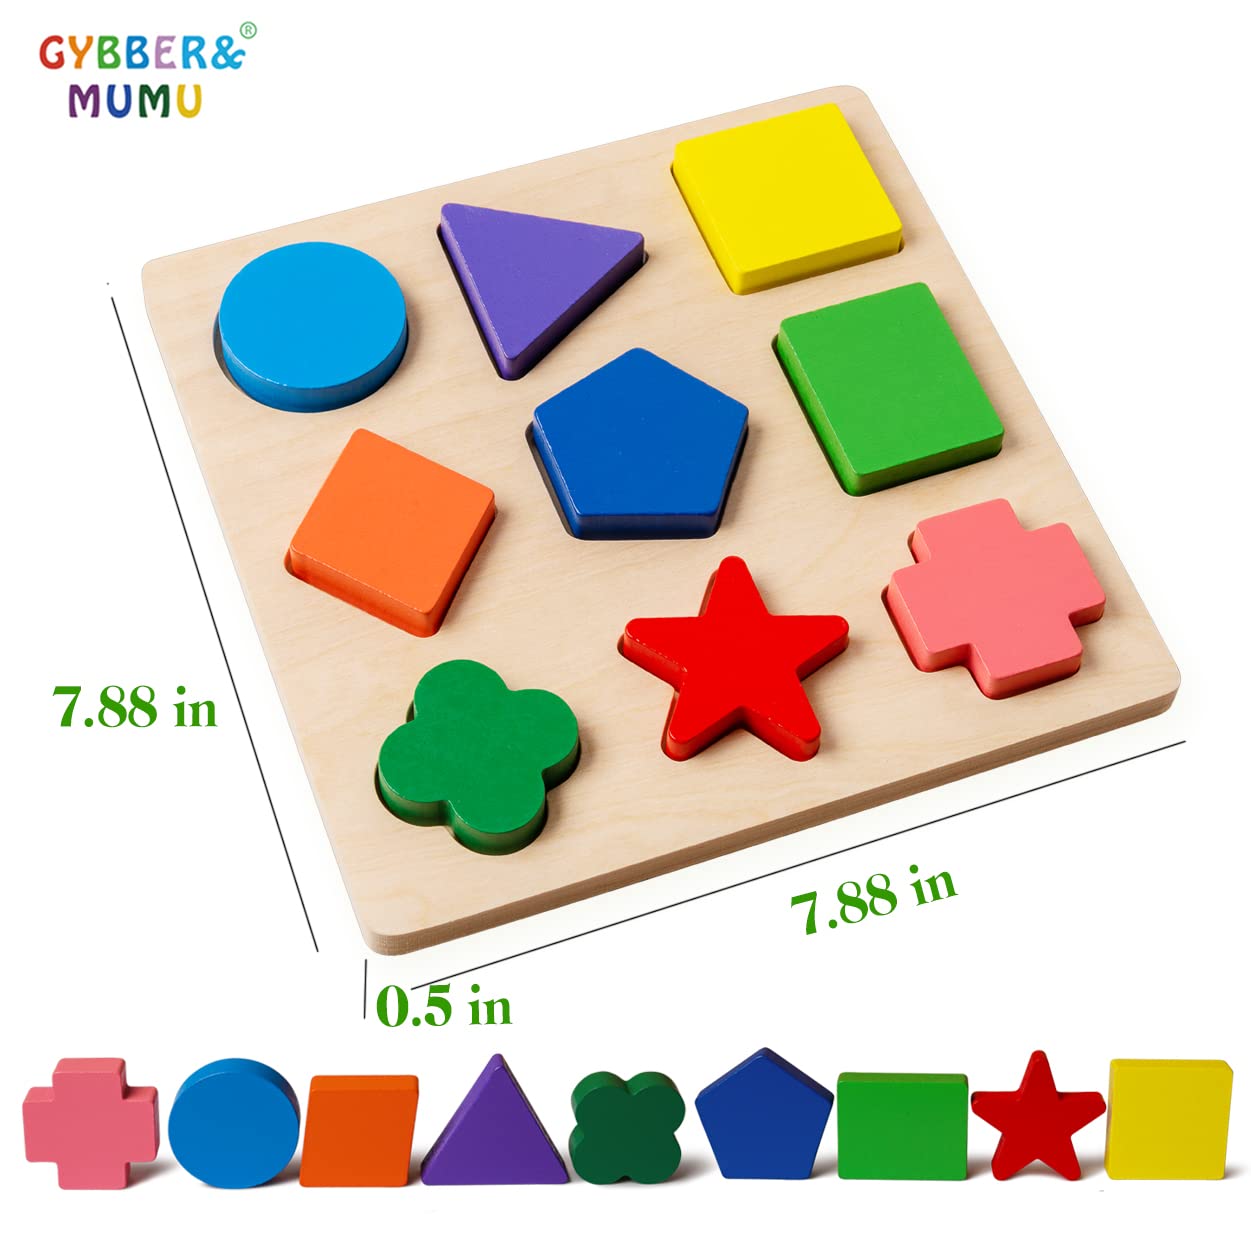 GYBBER&MUMU Preschool Colorful Wooden Shape Puzzle sorter Blocks for Toddlers 18 Month